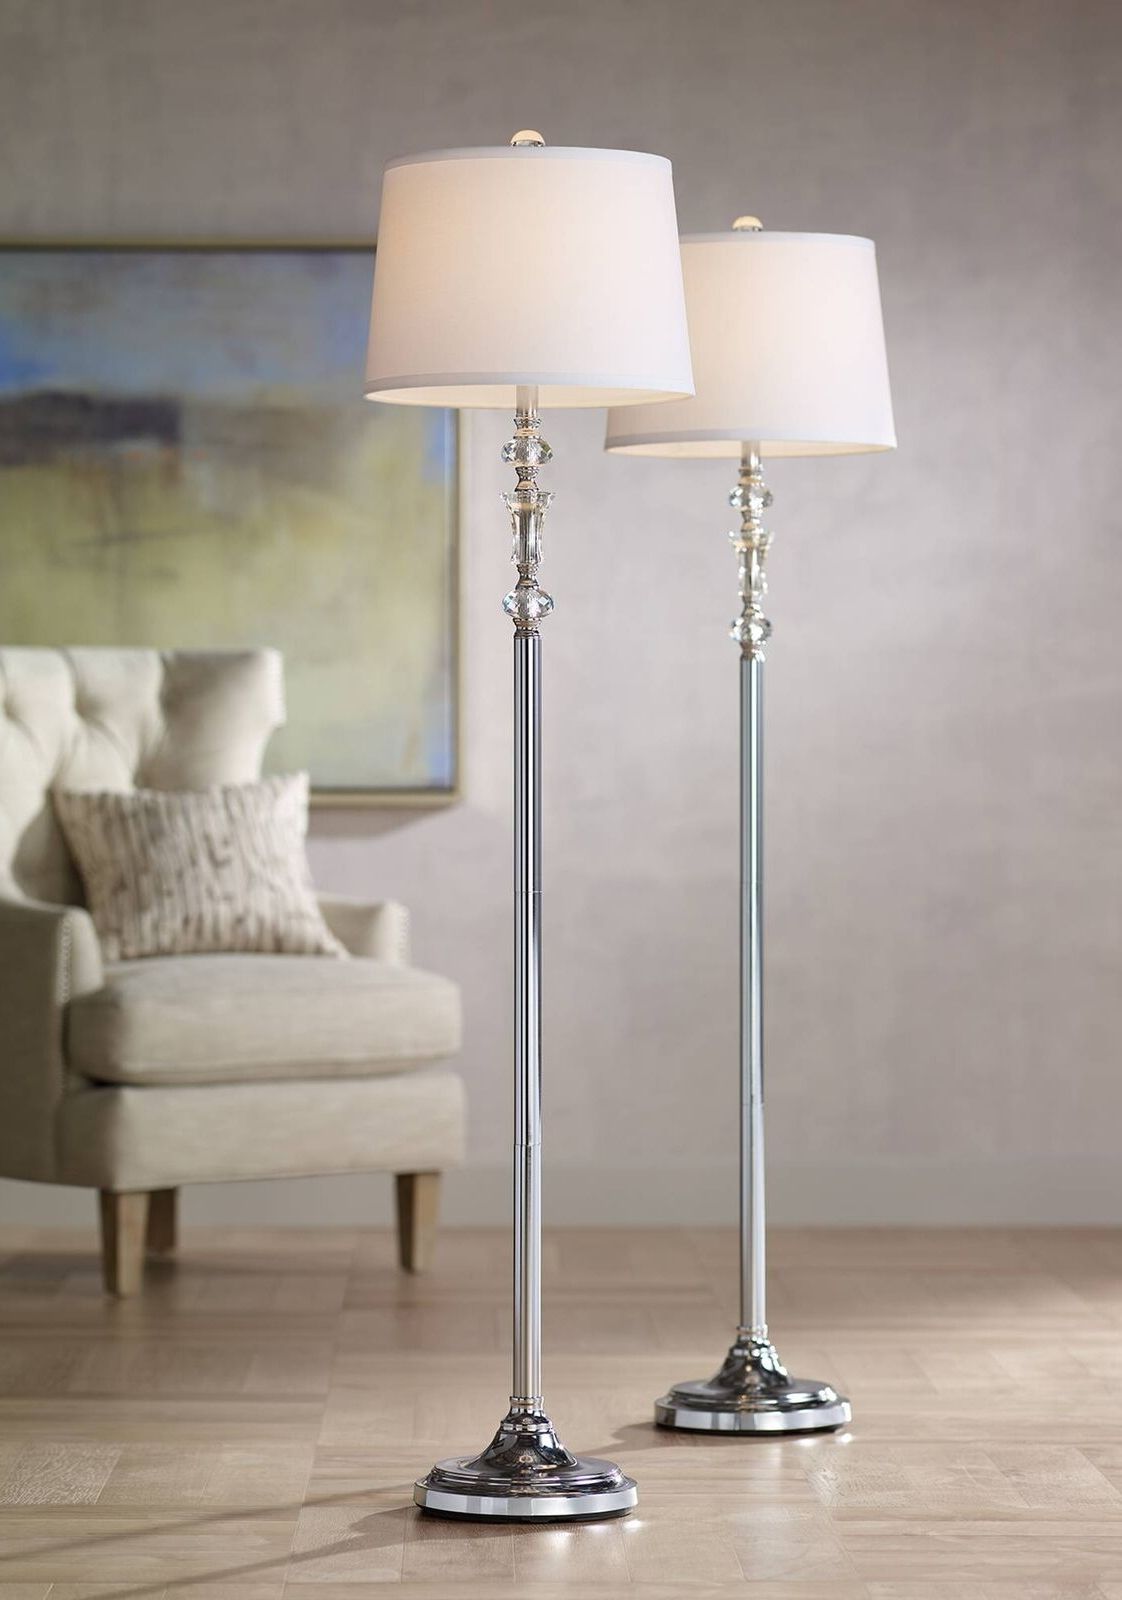 Floor Lamps Set Of 2 Polished Steel Crystal Glass For Living Room Bedroom |  Ebay With Regard To Wide Crystal Floor Lamps (View 11 of 20)